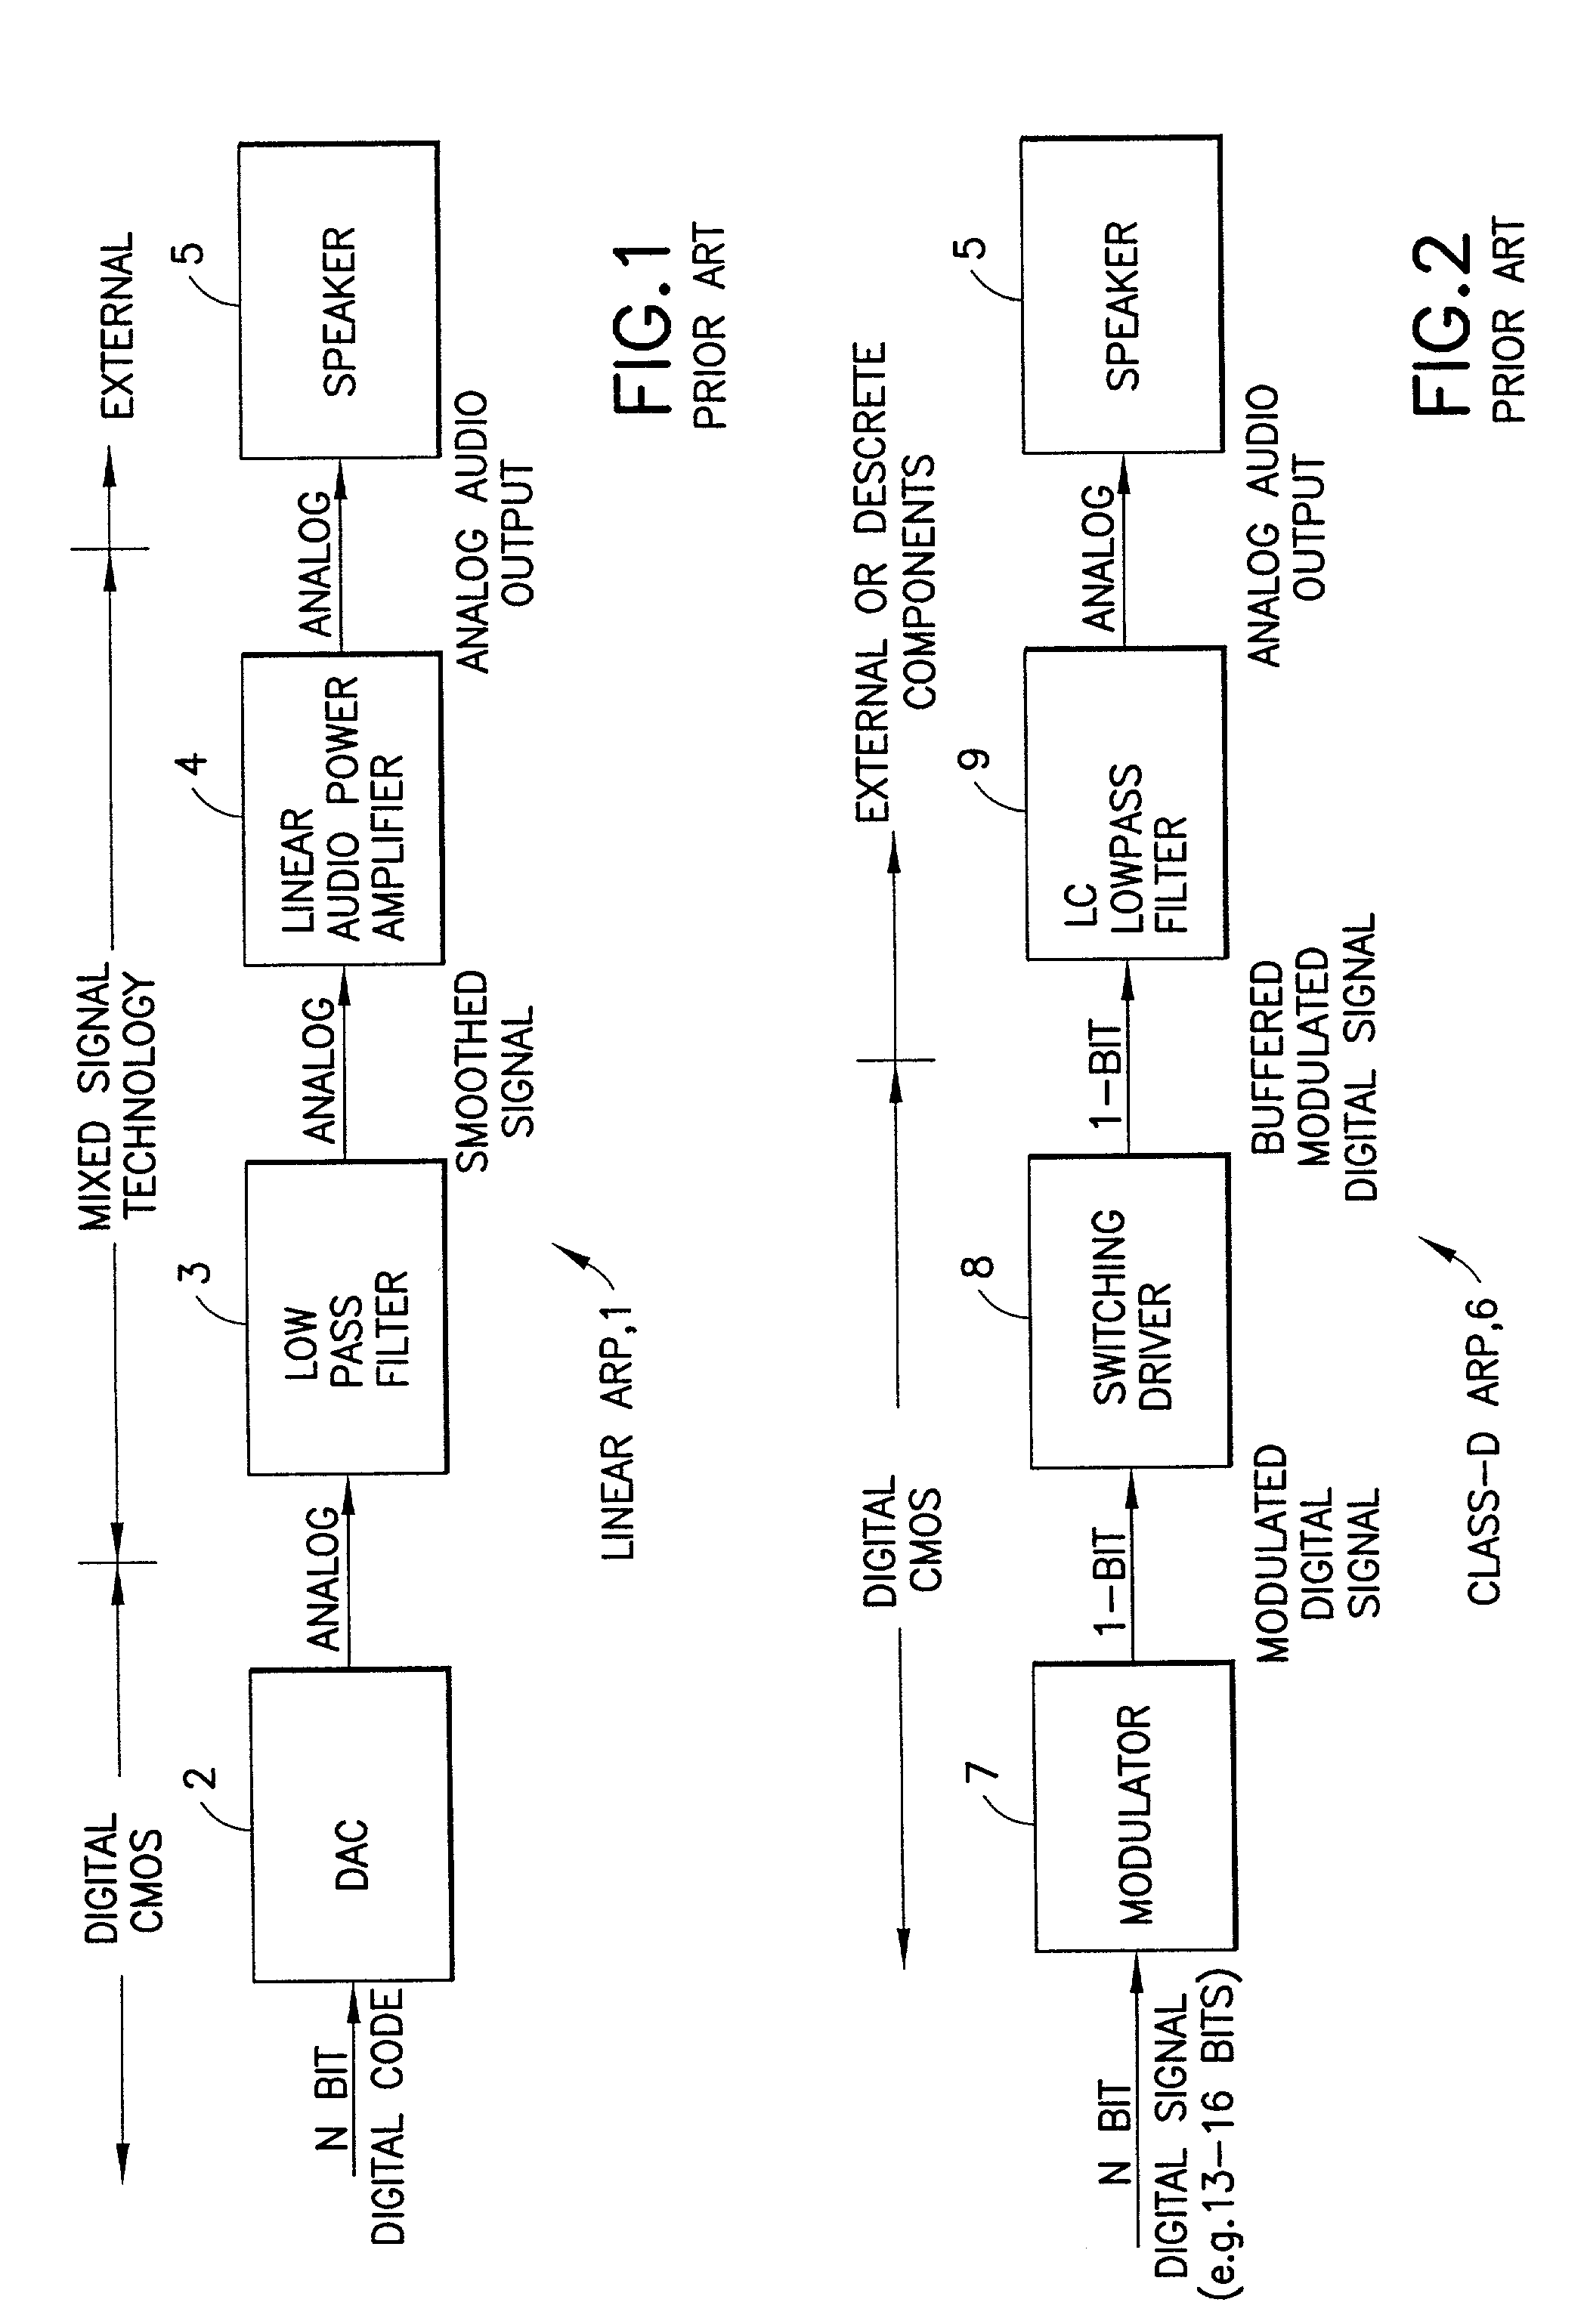 Method and apparatus for implementing a class D driver and speaker system